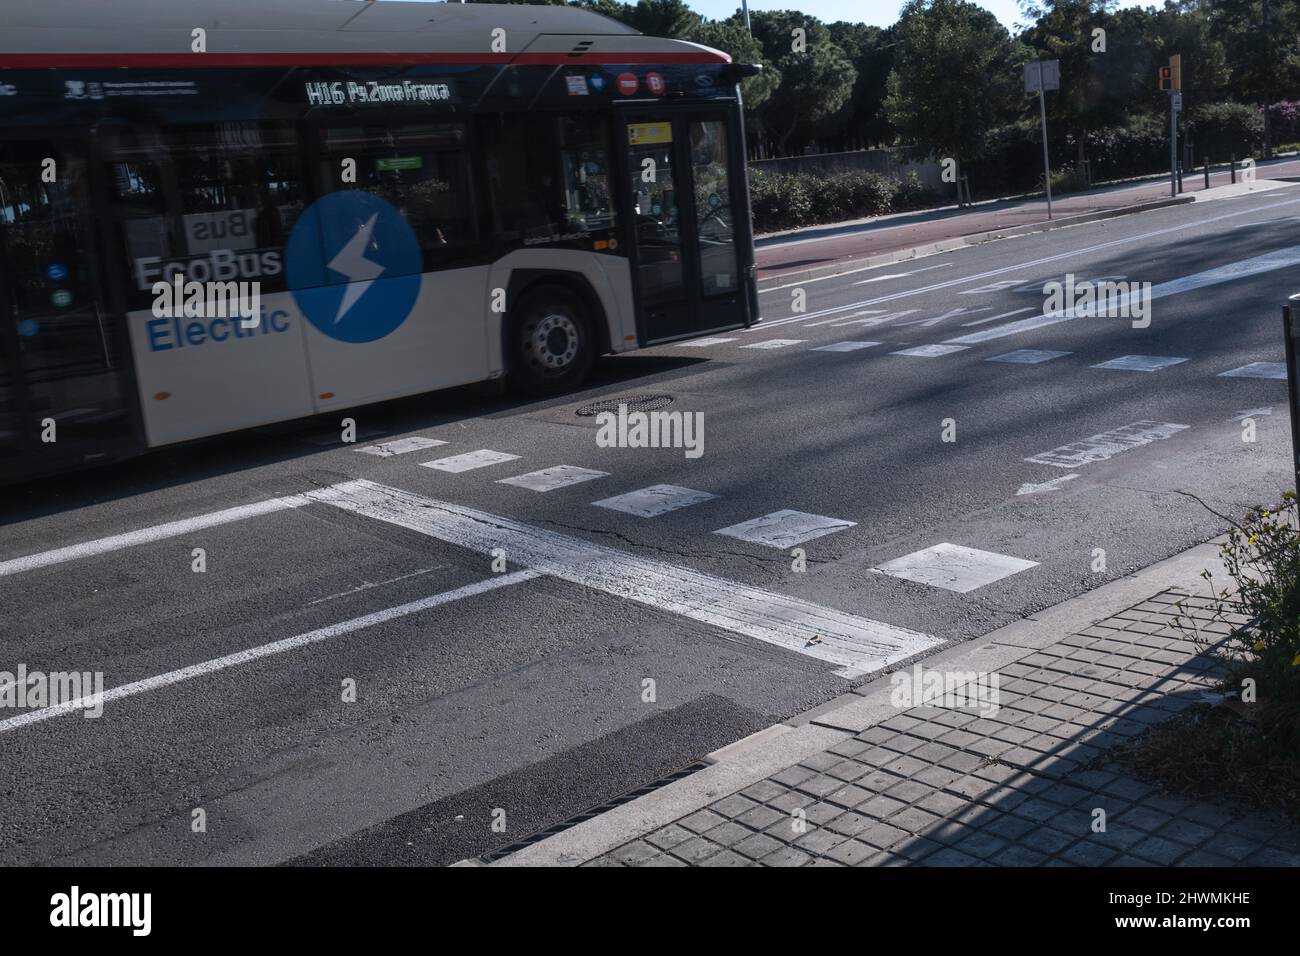 Barcelona, Spain: Bus on the road with zebra crossing sign Eco Bus Electric Stock Photo